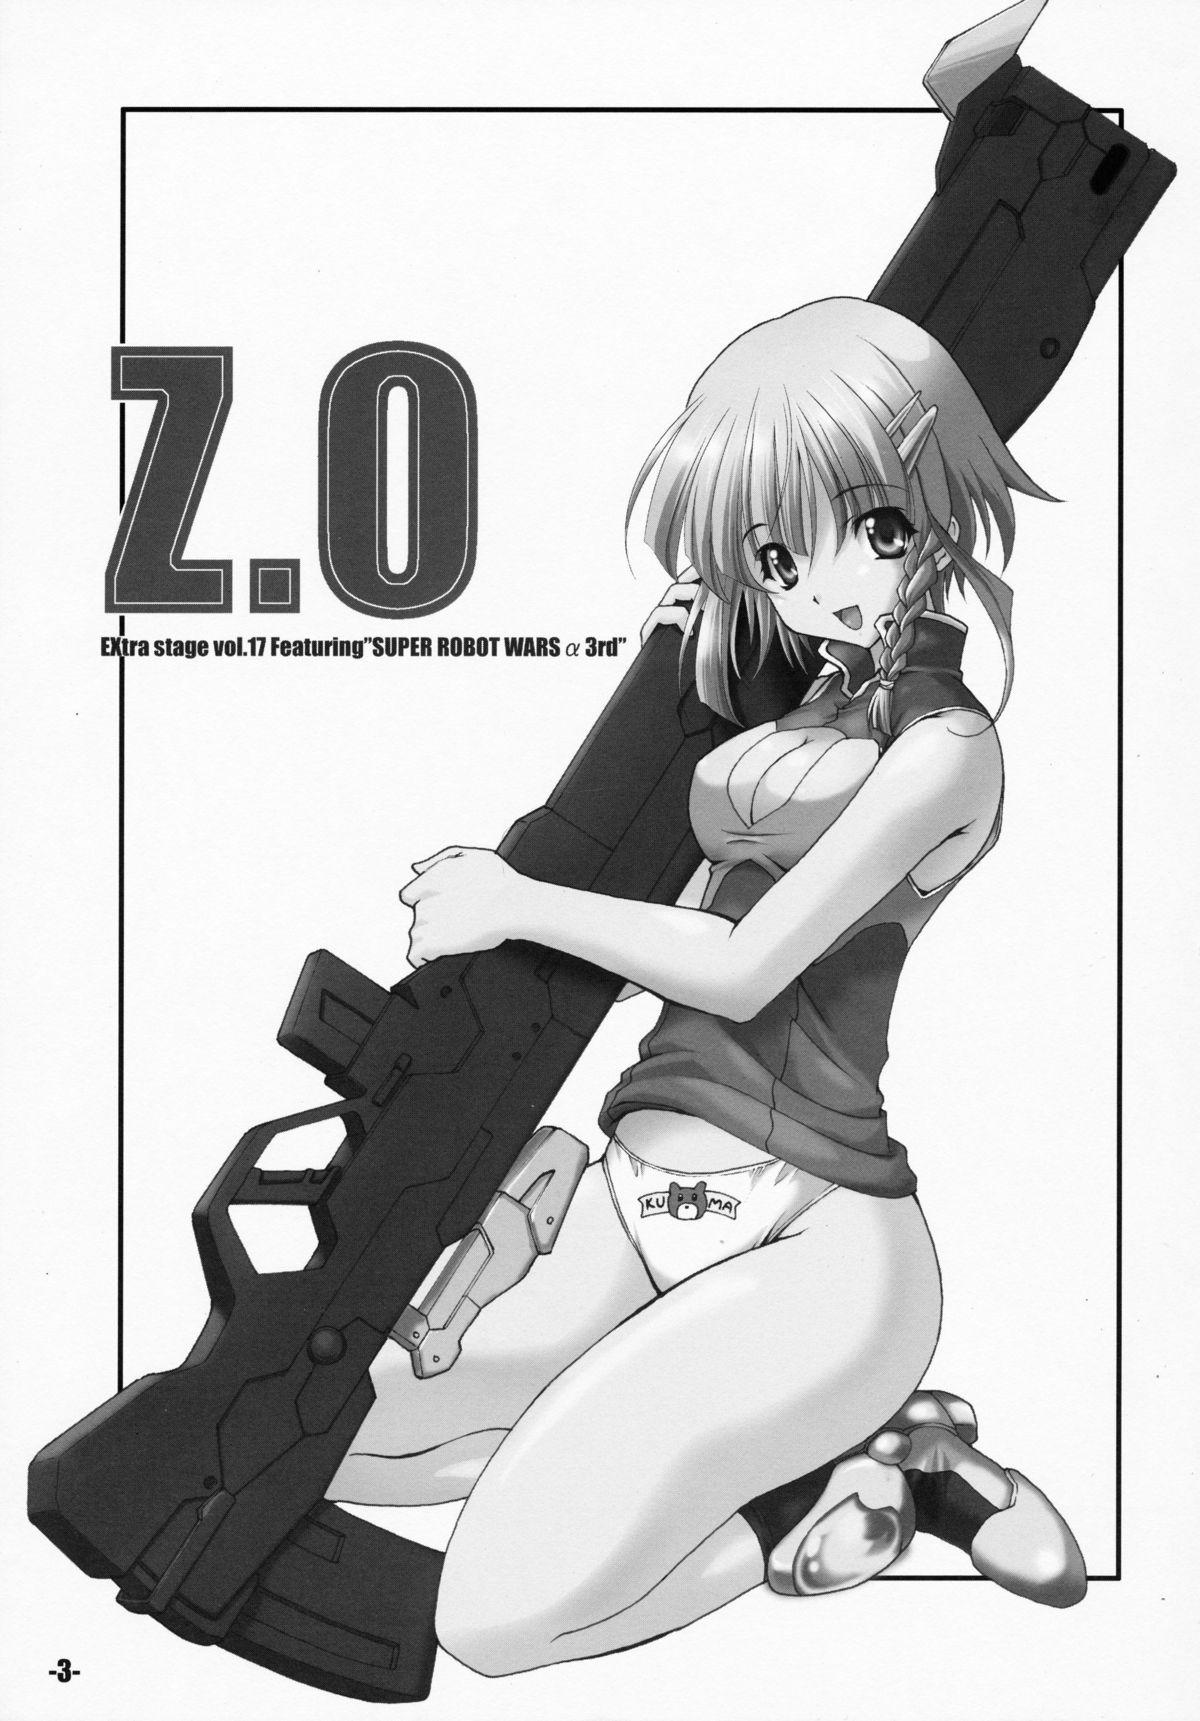 Hot Naked Women EXtra stage vol.17 Z.O - Super robot wars Hard Fuck - Page 3